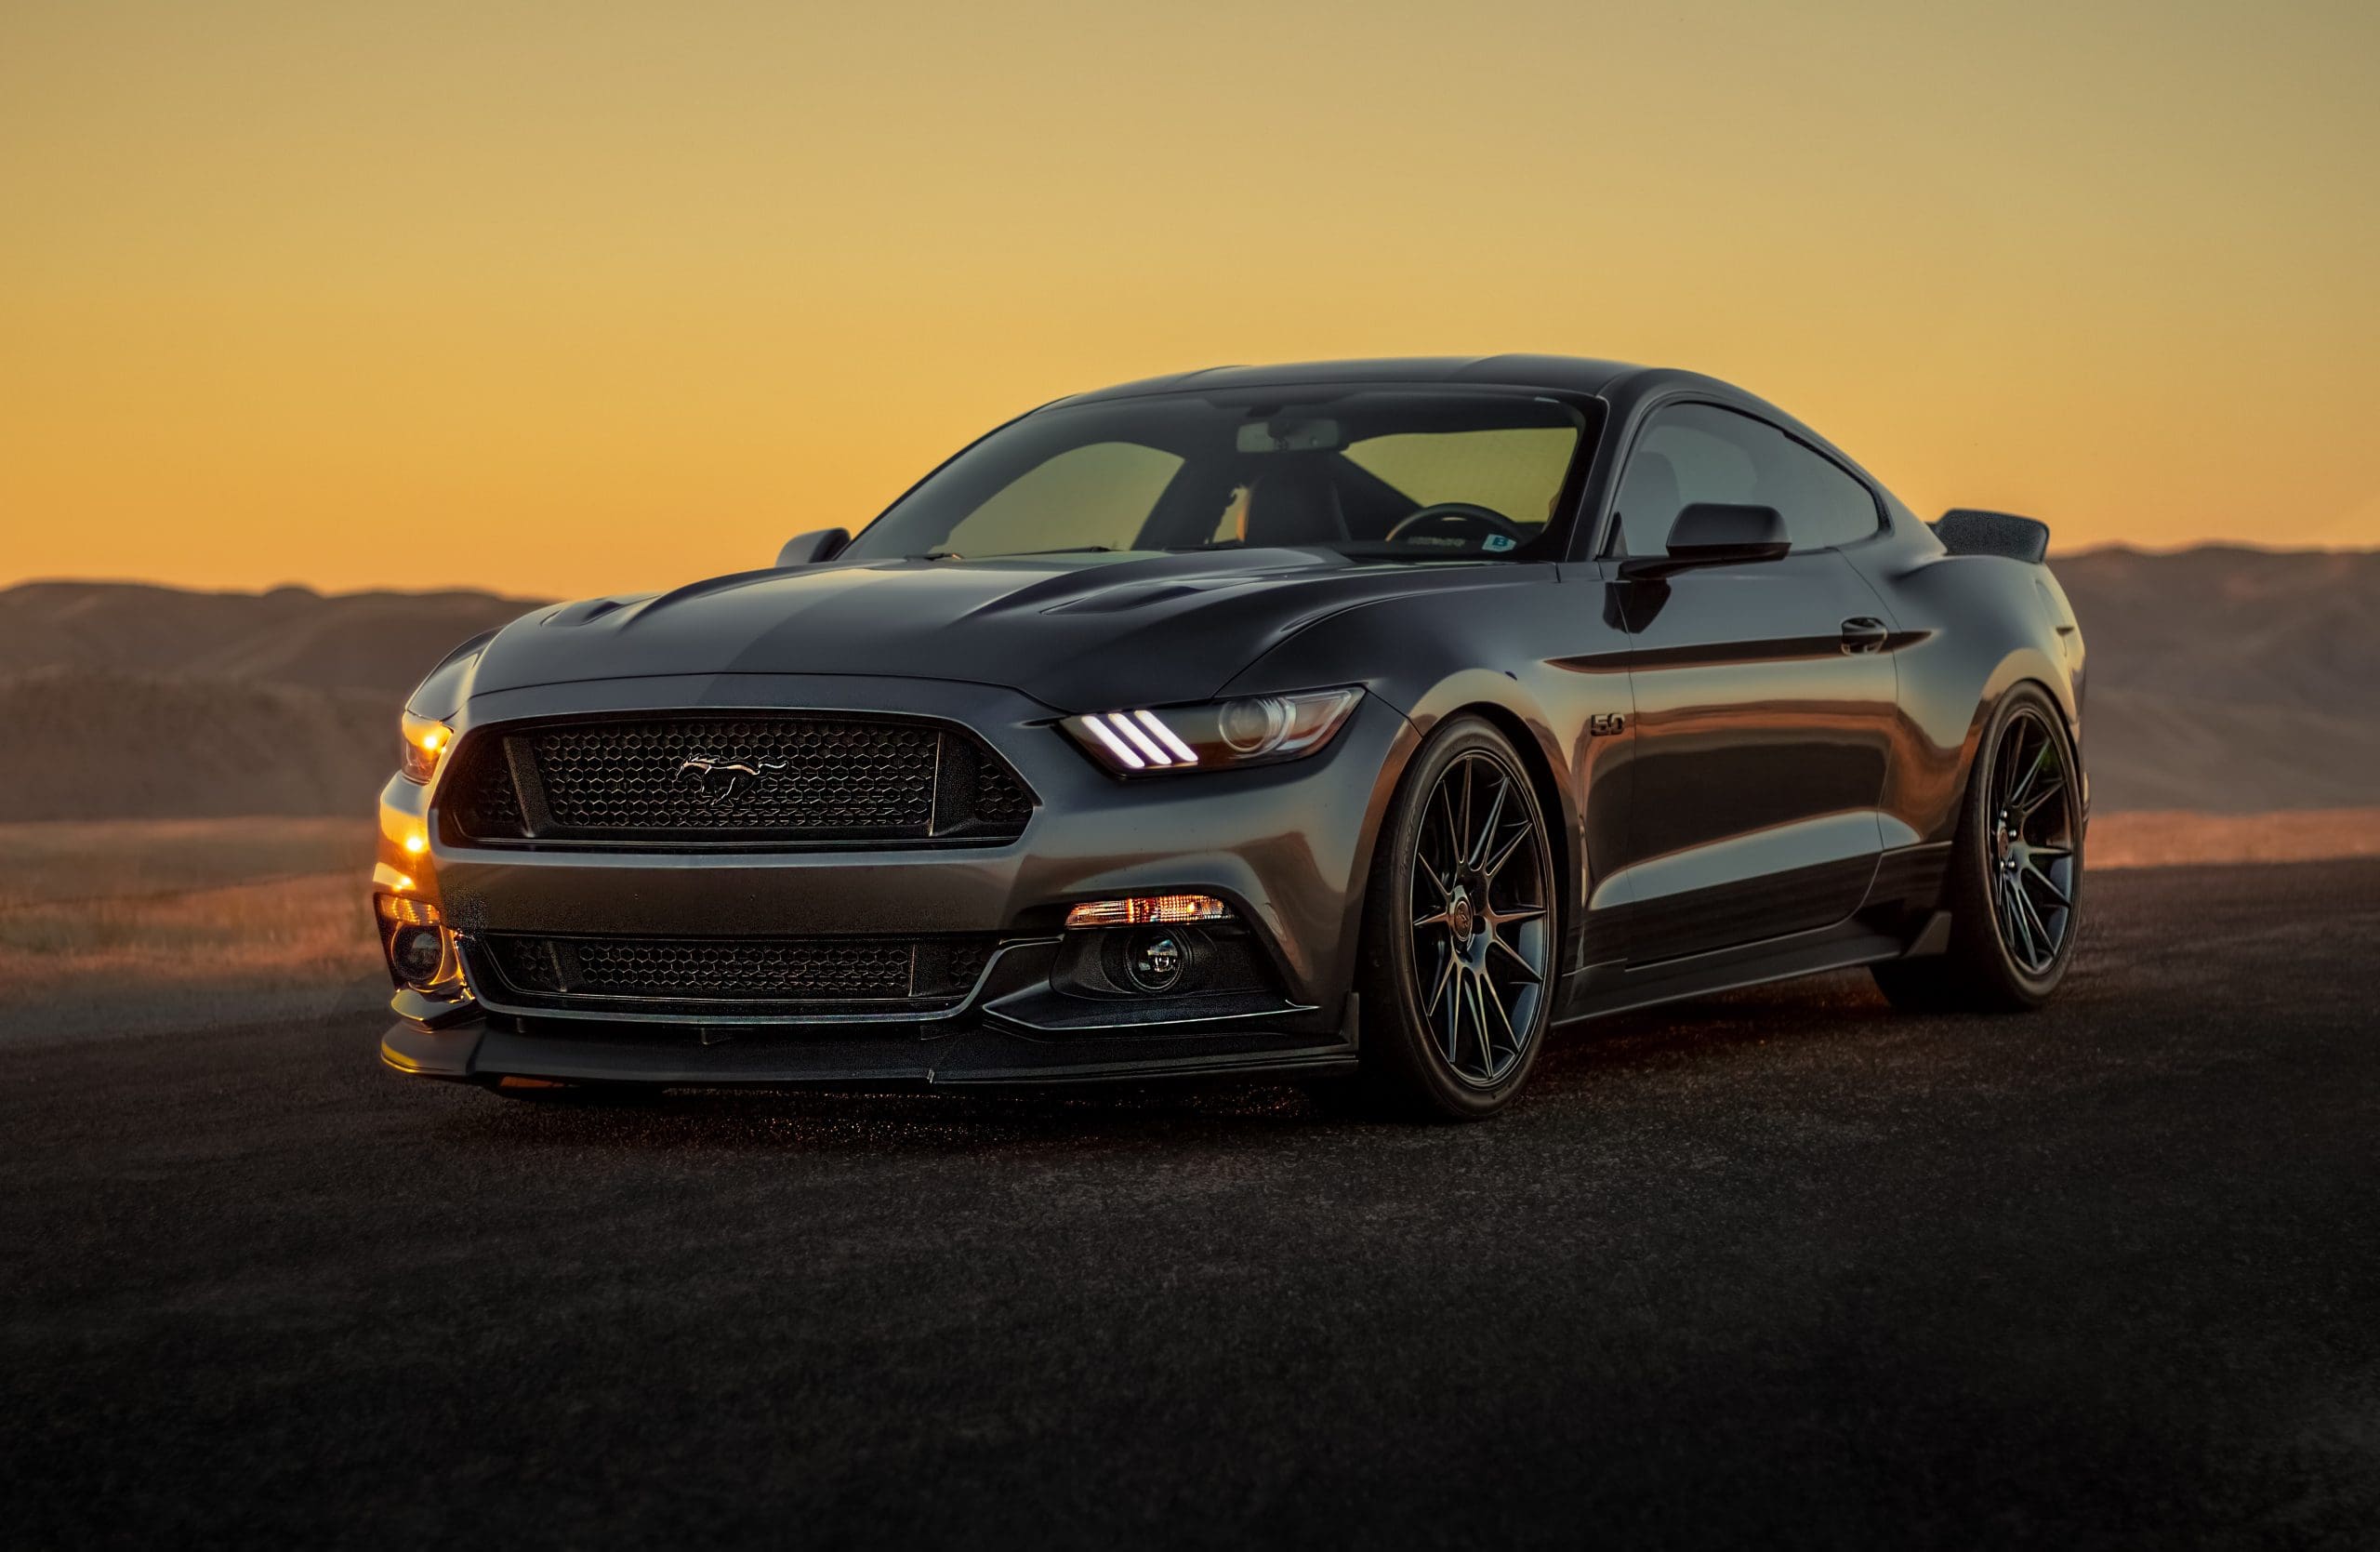 Mustang Wallpapers: Free to Download